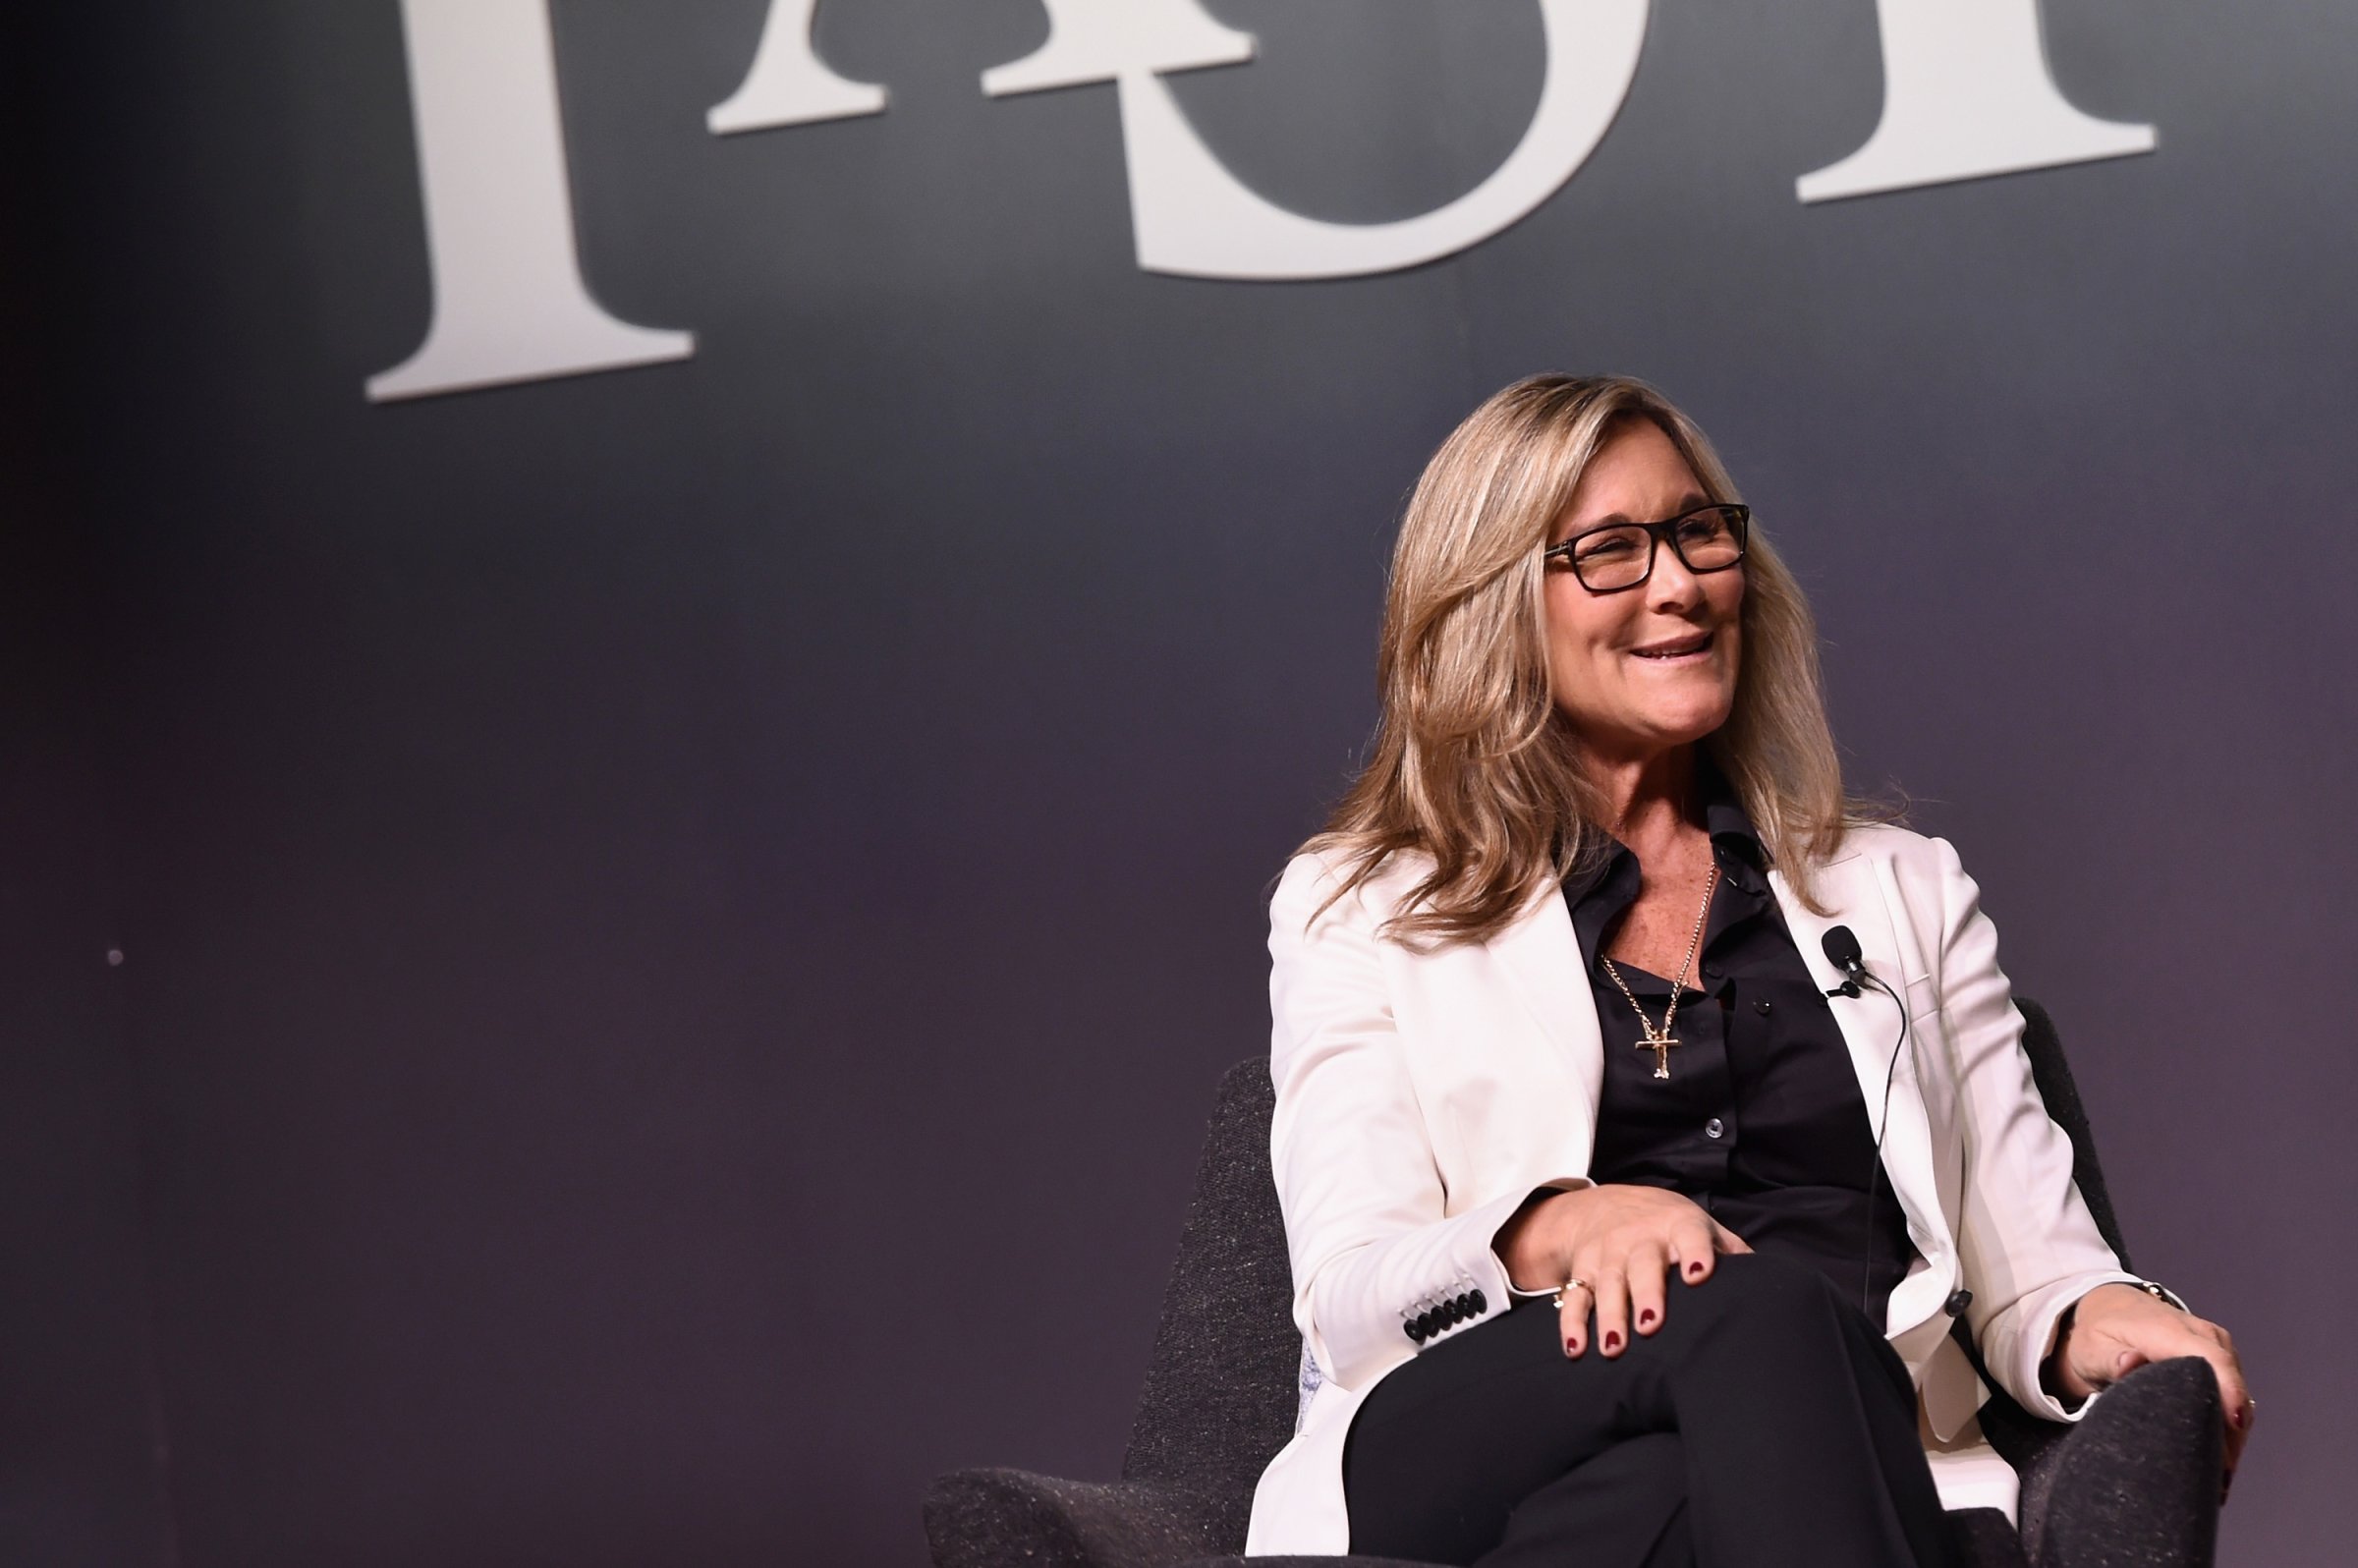 Senior Vice President of Apple Retail at Apple Inc, Angela Ahrendts speaks onstage during the Fast Company Innovation Festival in New York City on Nov. 9, 2015.